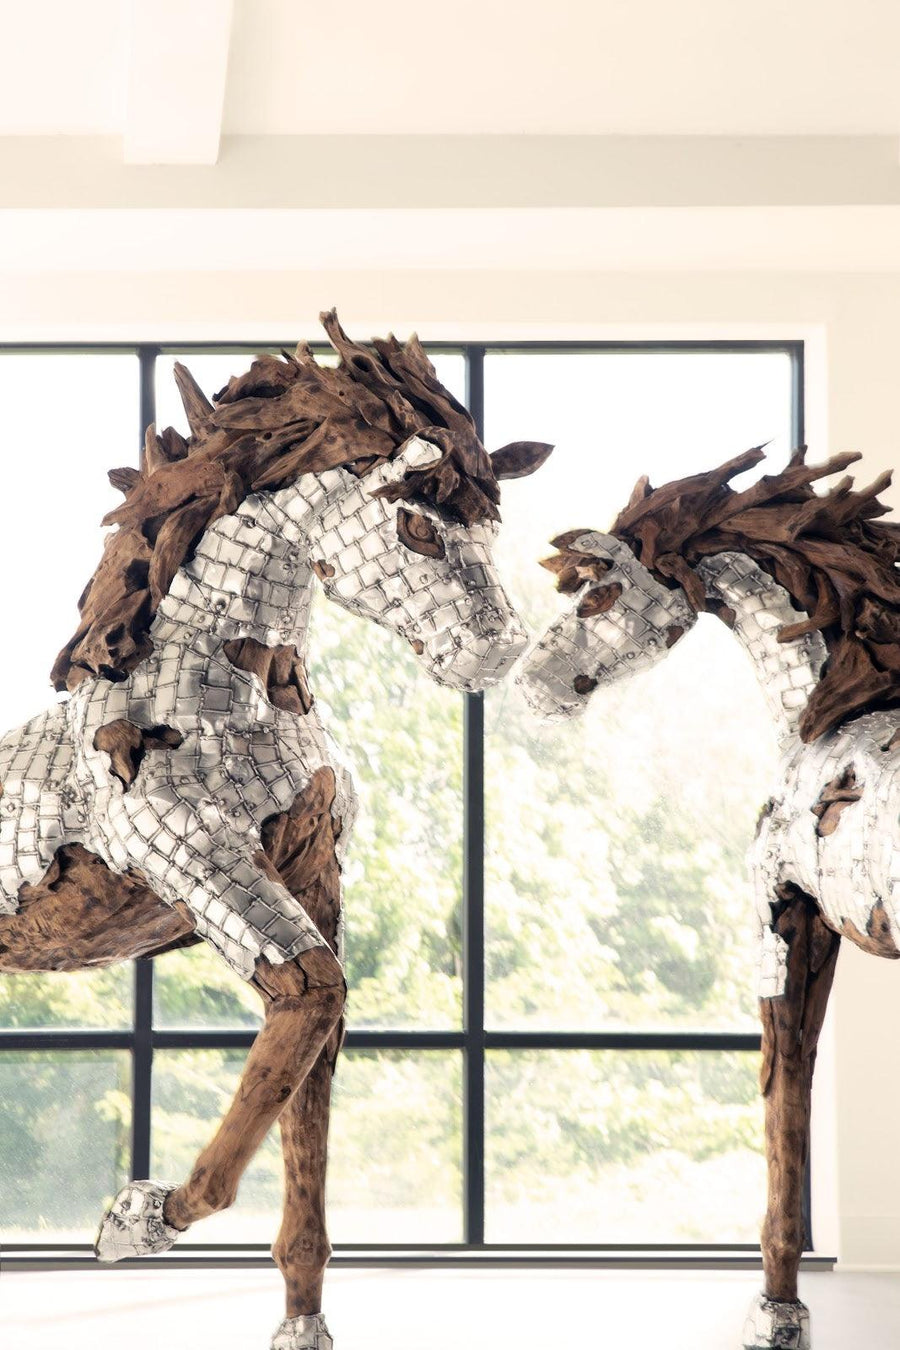 Mustang Horse Armored Sculpture Galloping - Maison Vogue